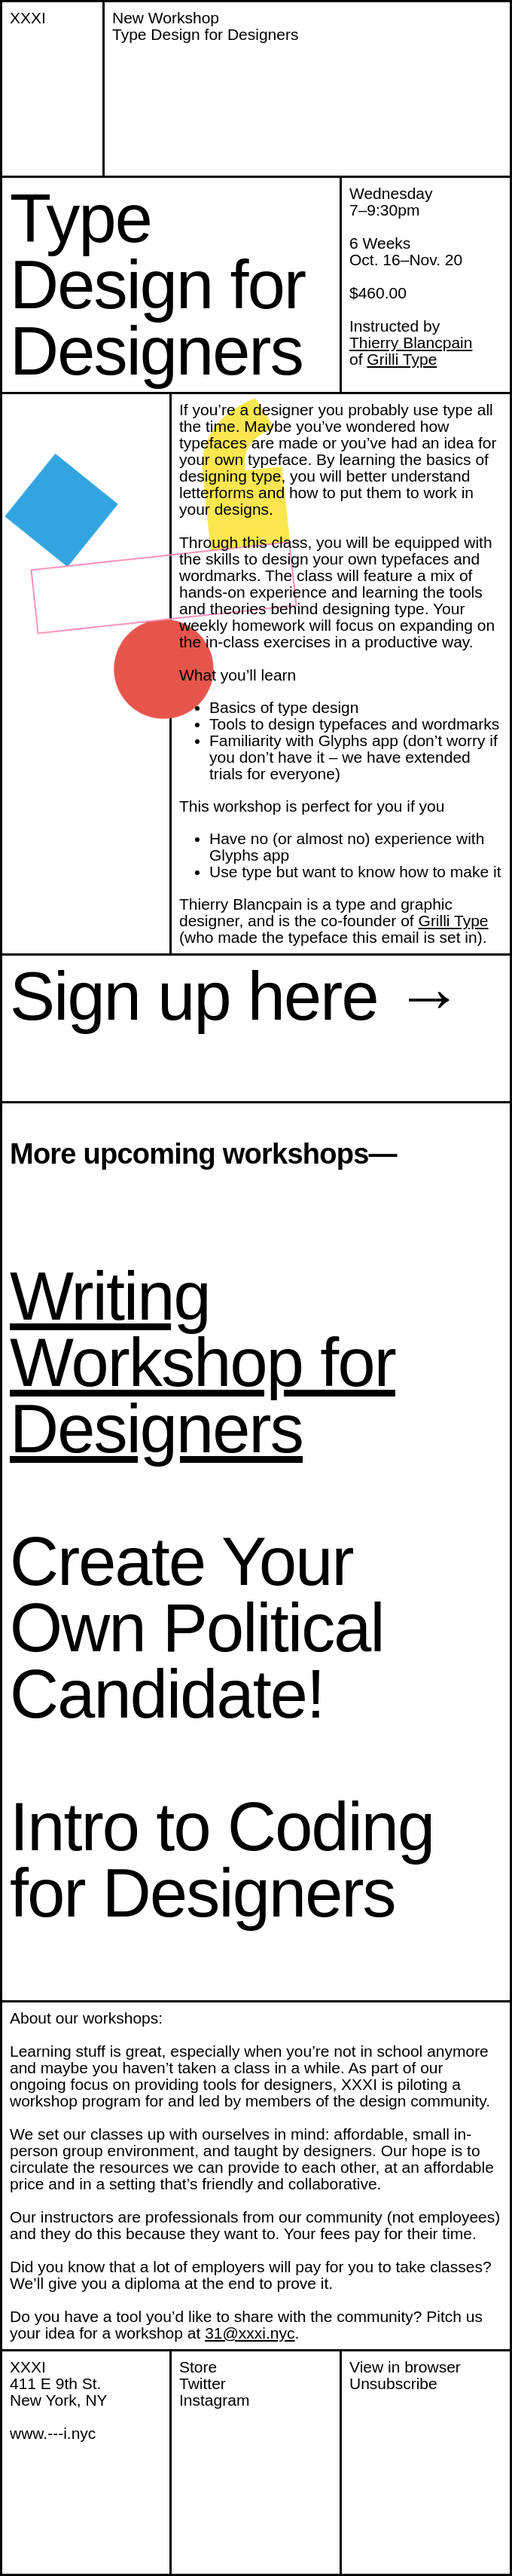 New Workshop at XXXI: Type Design for Designers